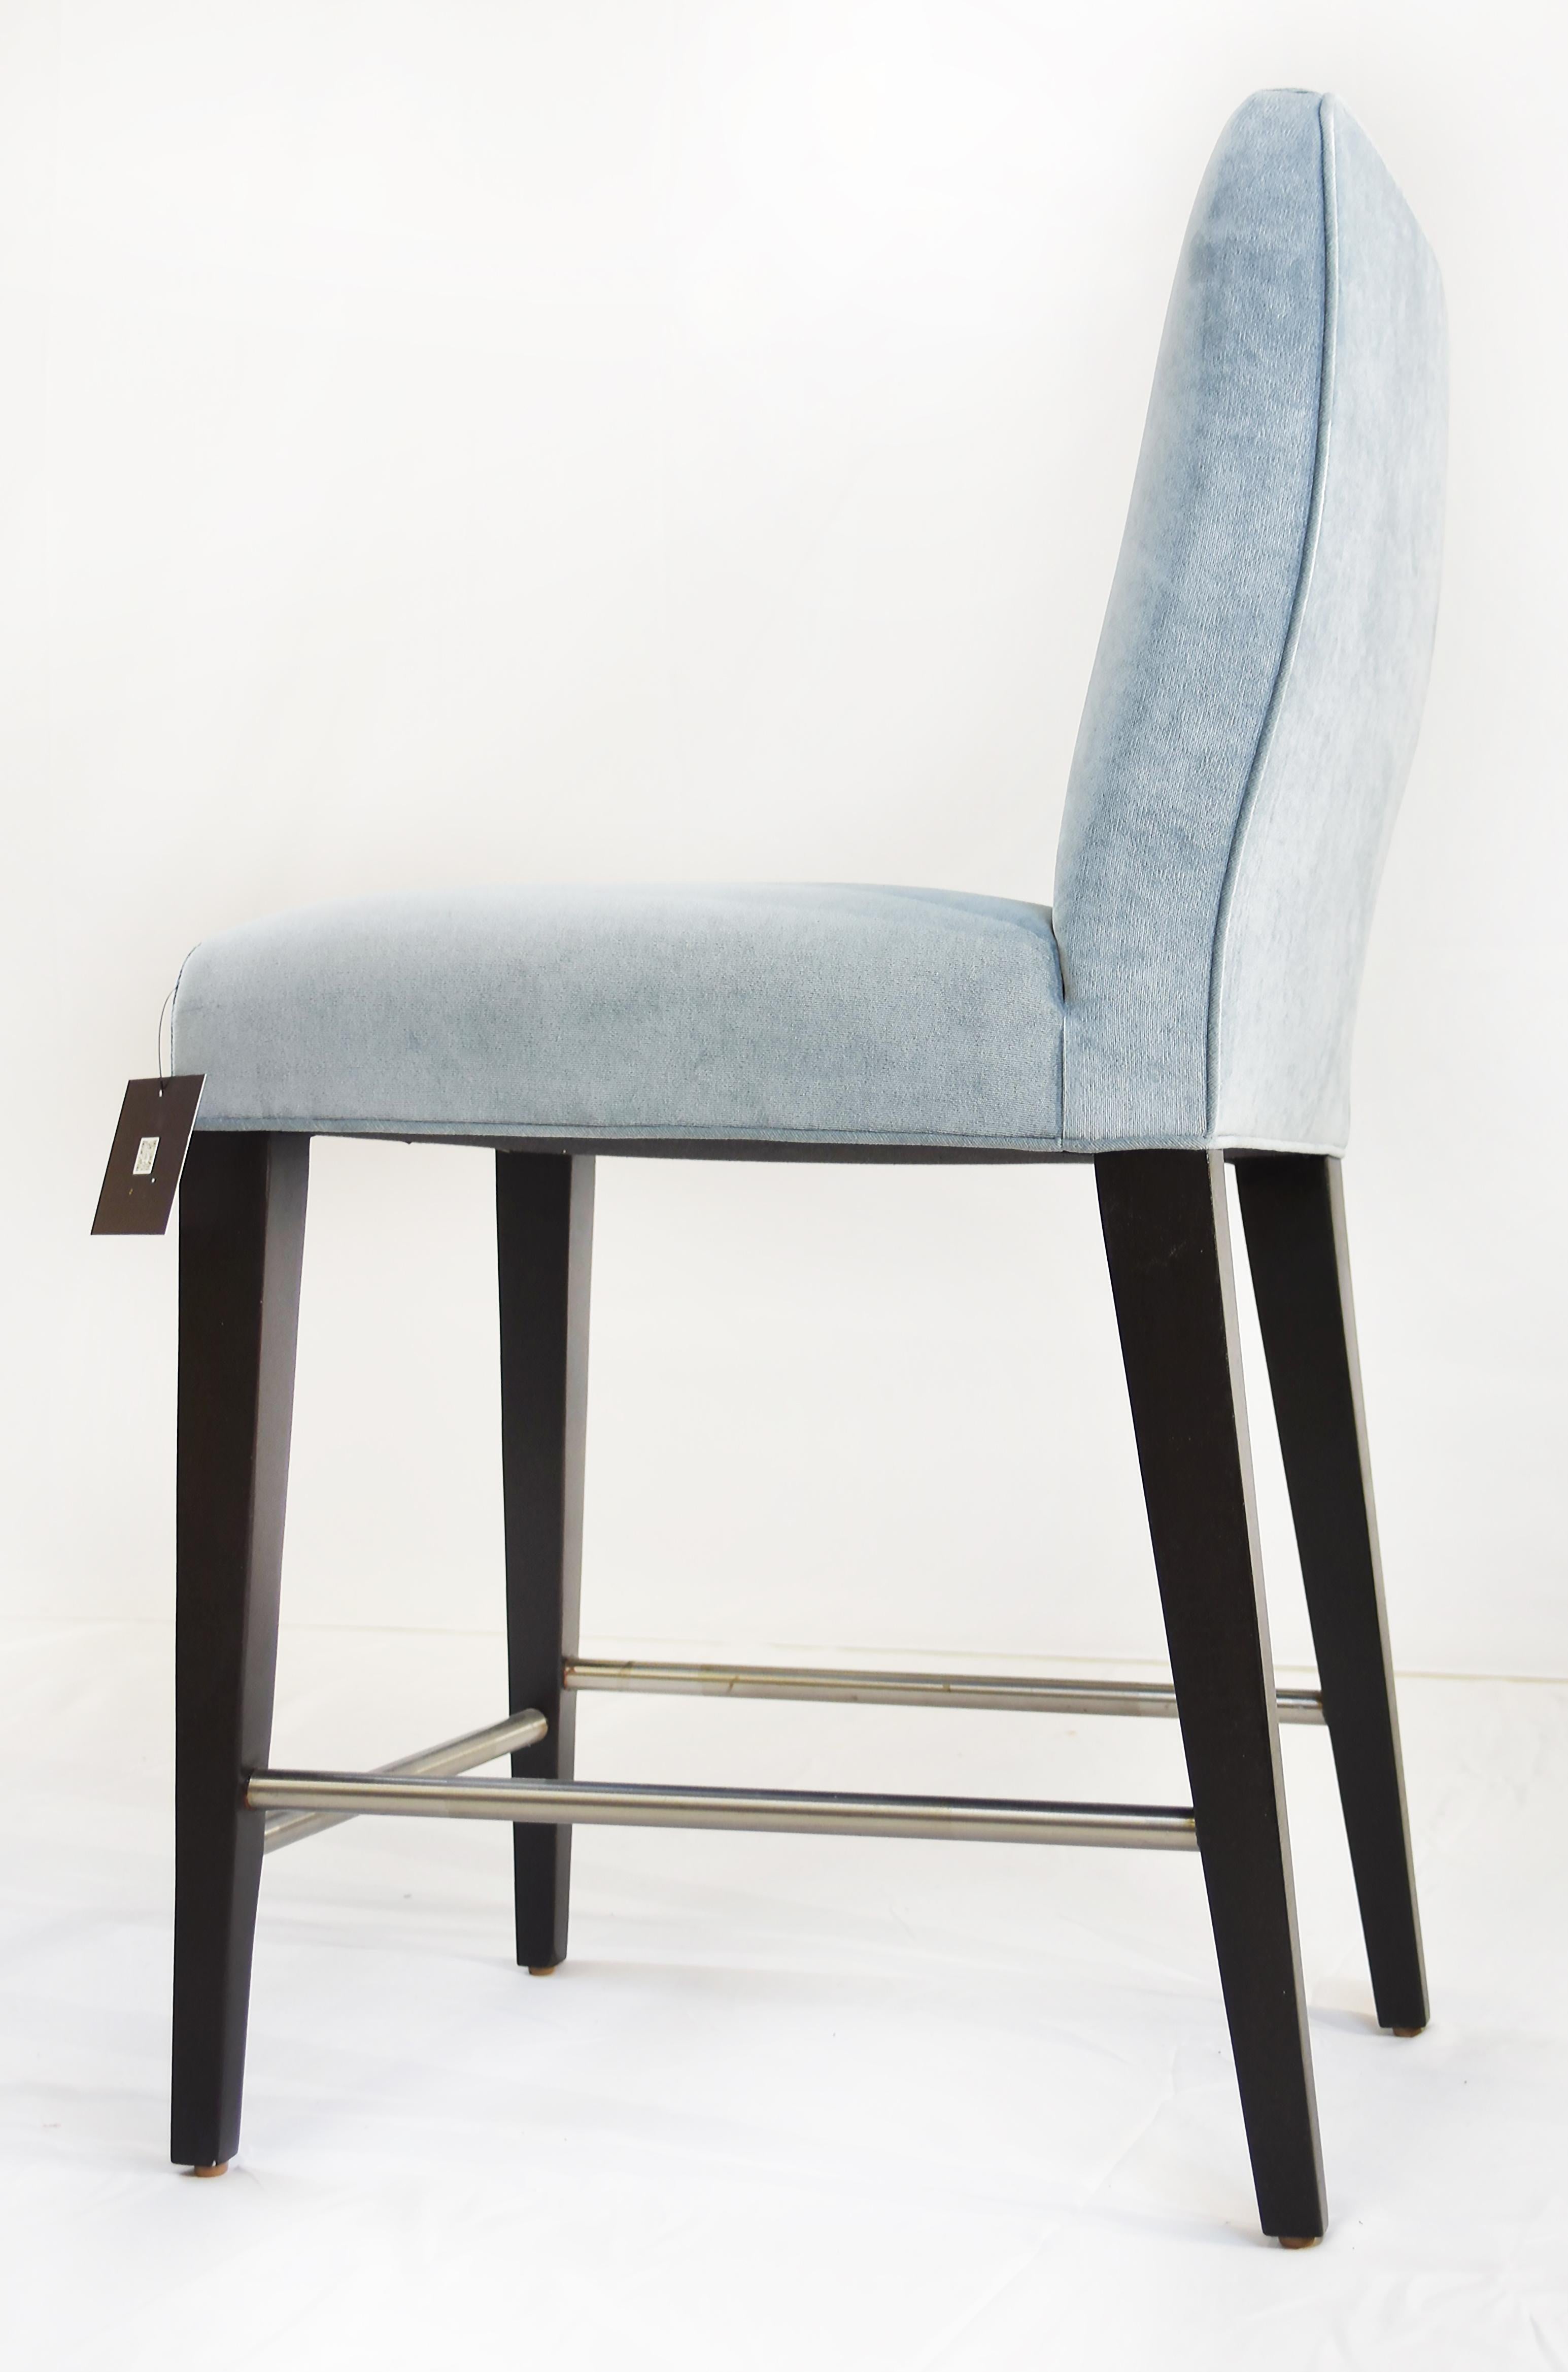 Le Jeune Upholstery Cutler Counter Stool Floor Model with Metal Footrest

Offered for sale is a counter-height Cutler bar stool showroom floor sample from Le Jeune Upholstery. The stool has a tight seat and back with exposed Mahogany wood legs done